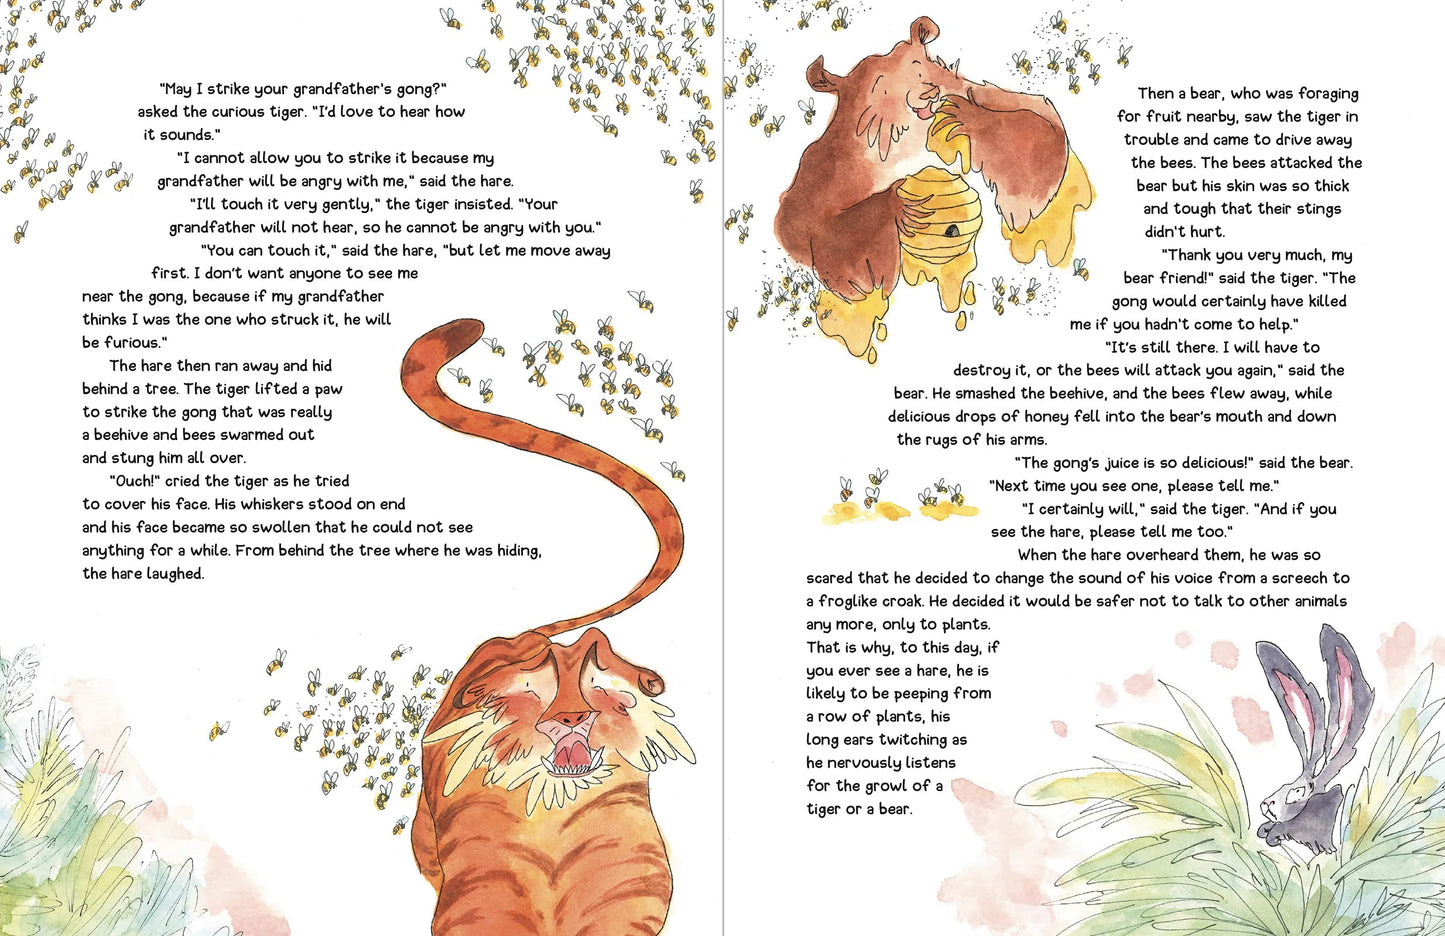 Burmese Children's Favorite Stories: Fables, Myths and Fairy Tales